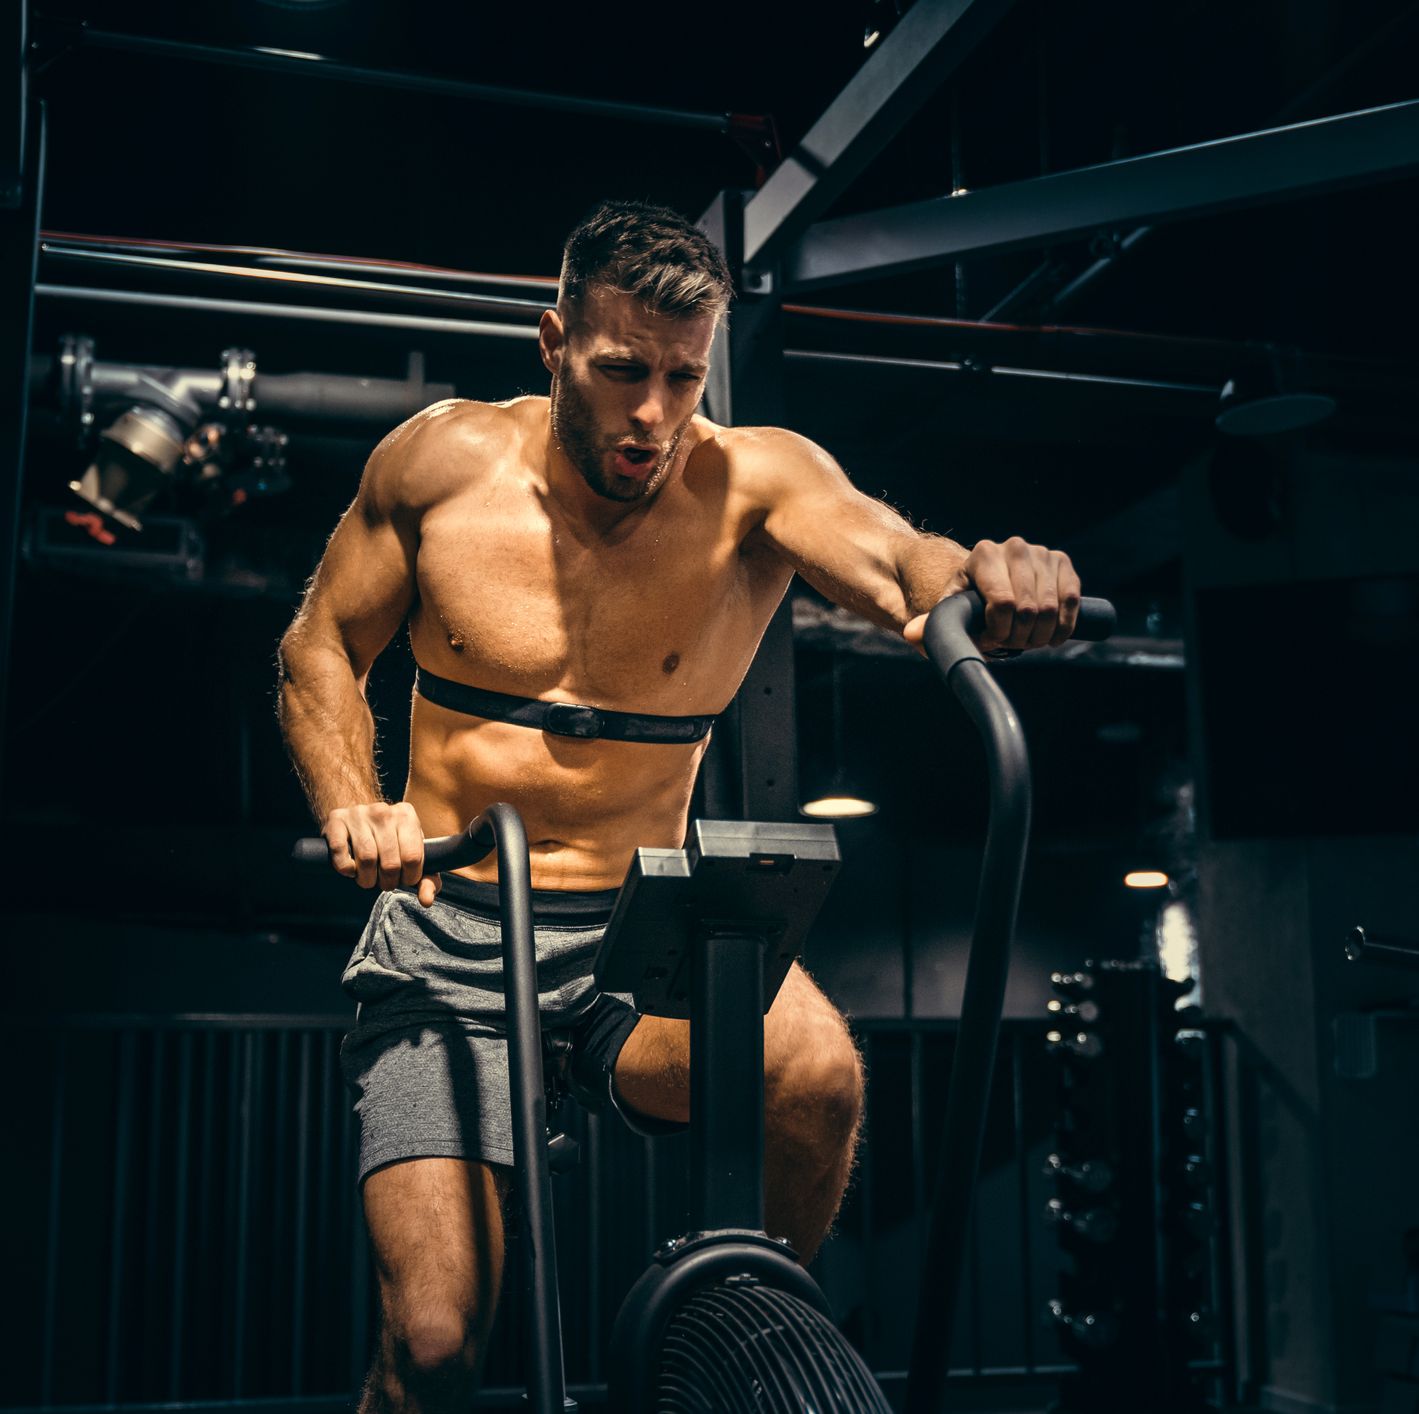 A Bodybuilding Coach Explains Why Burning More Fat Doesn't Equal More Fat Loss